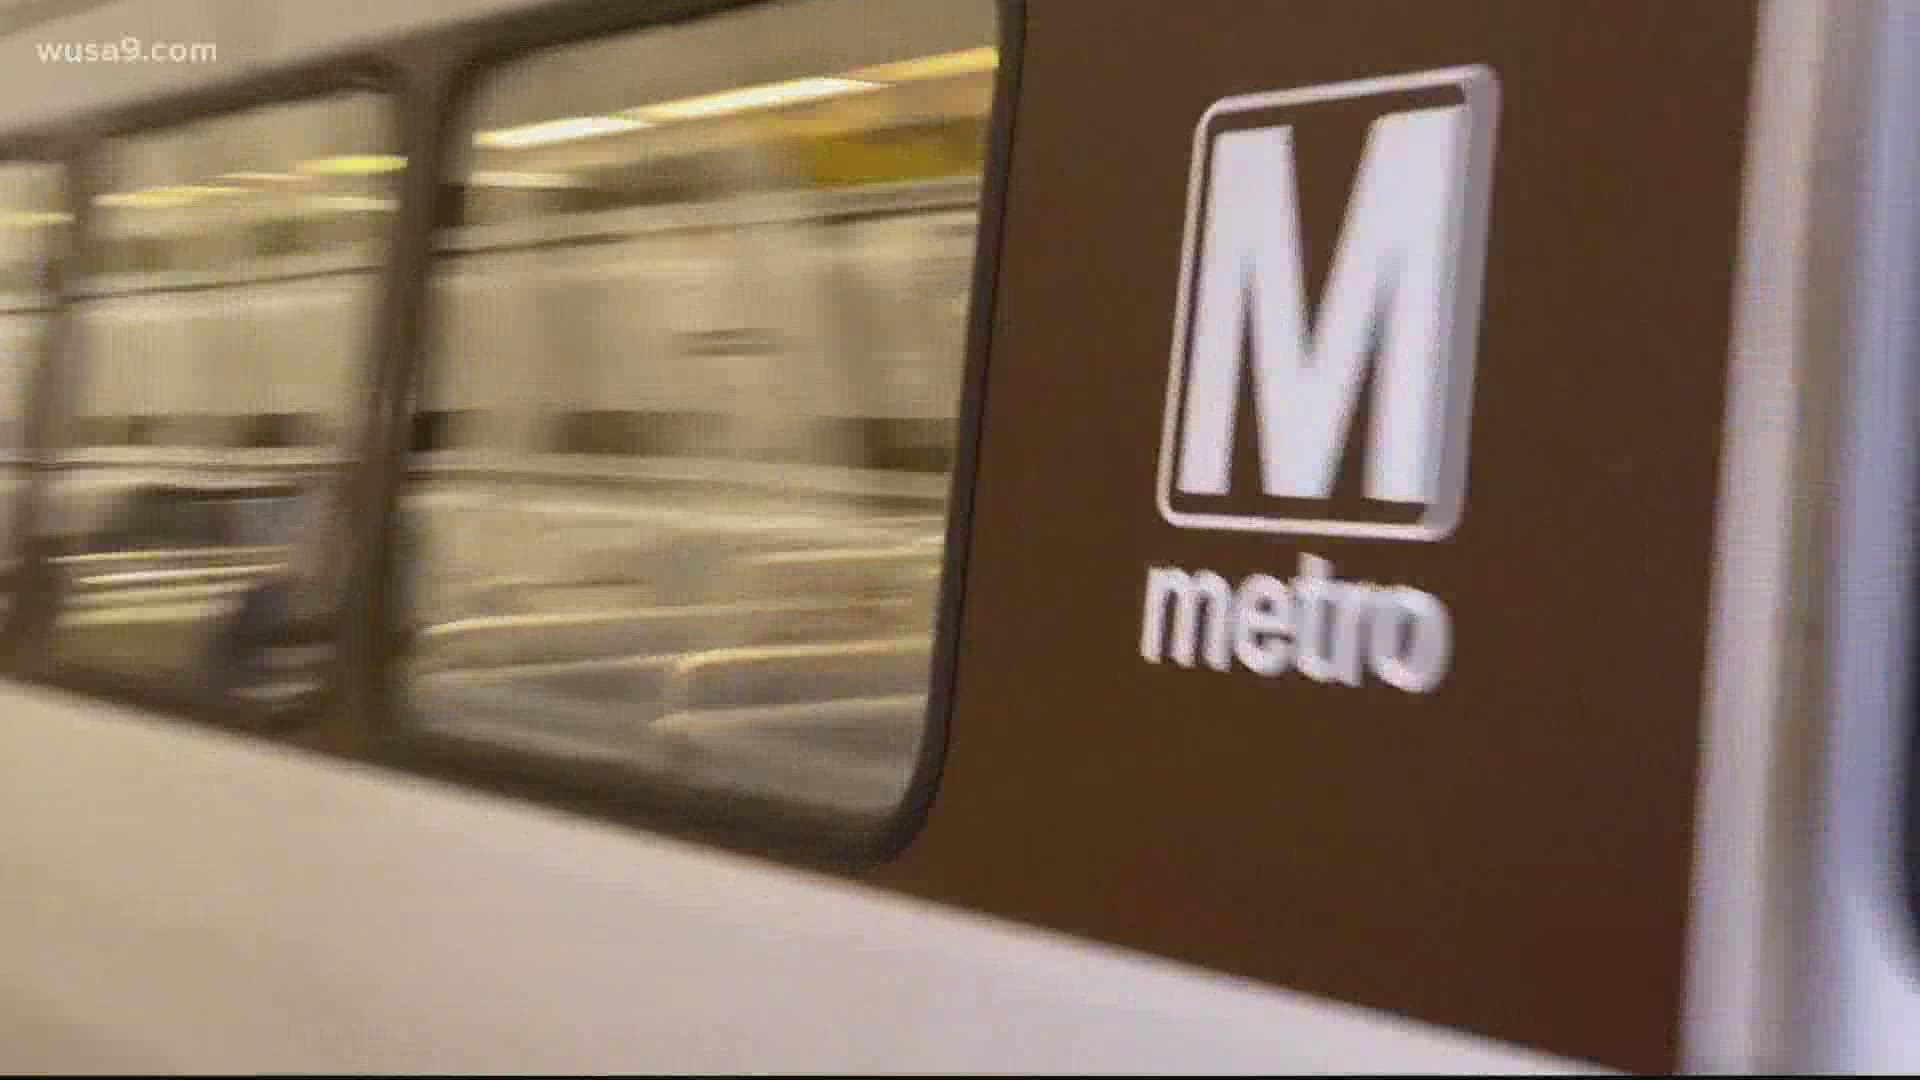 Metro has some ideas to get people back on public transit following the pandemic.